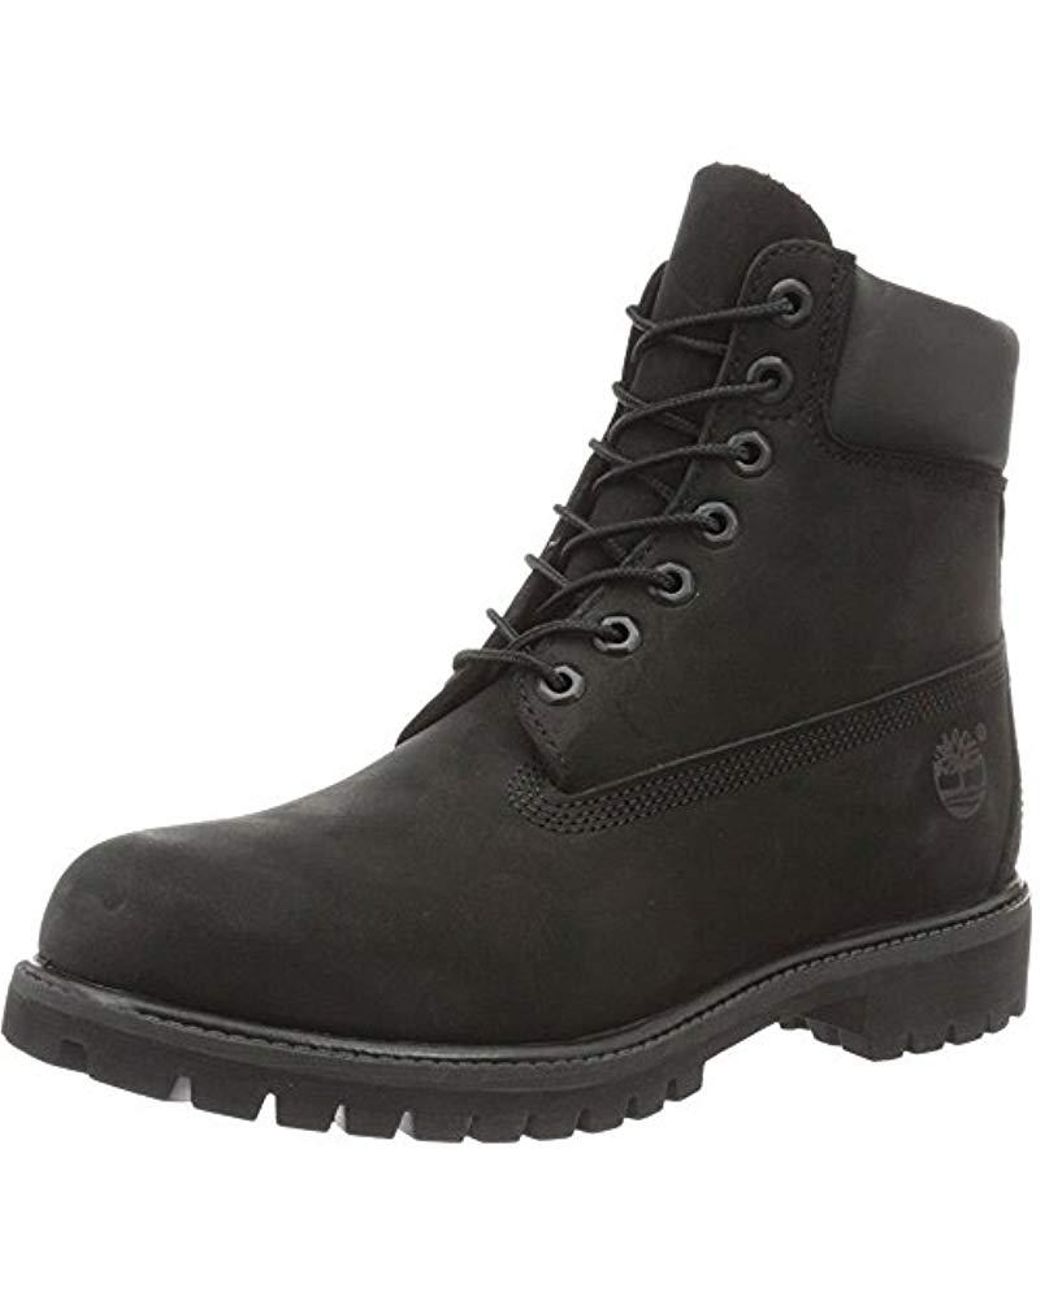 Lyst - Timberland 6 Inch Premium Waterproof Boots in Black for Men